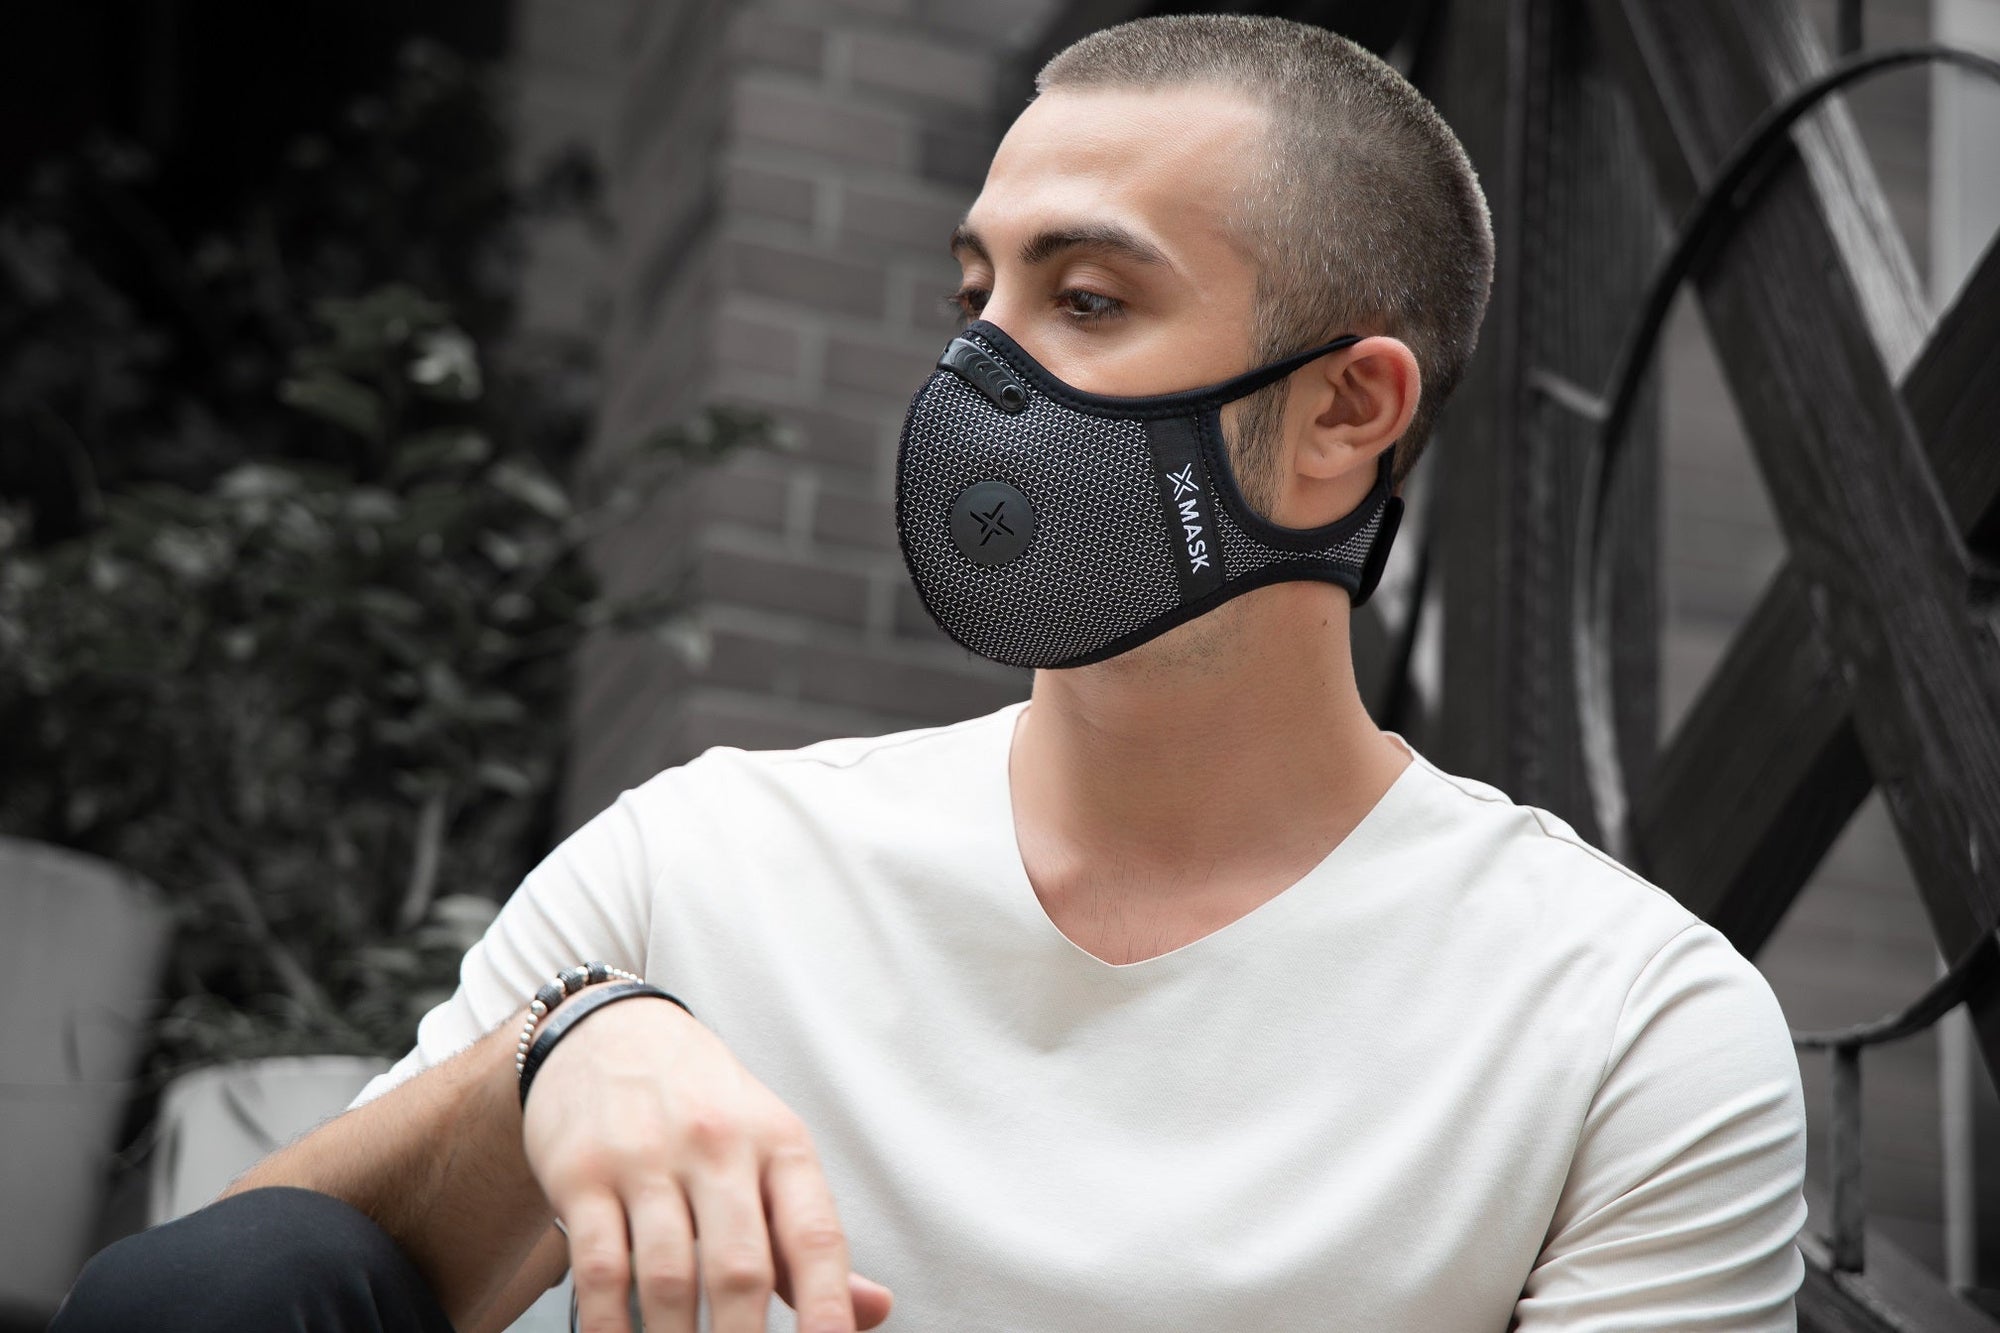 xSuit Donates More Than 40,000 Masks to Frontline Hospital Workers in Fight Against Covid-19 - XSuit